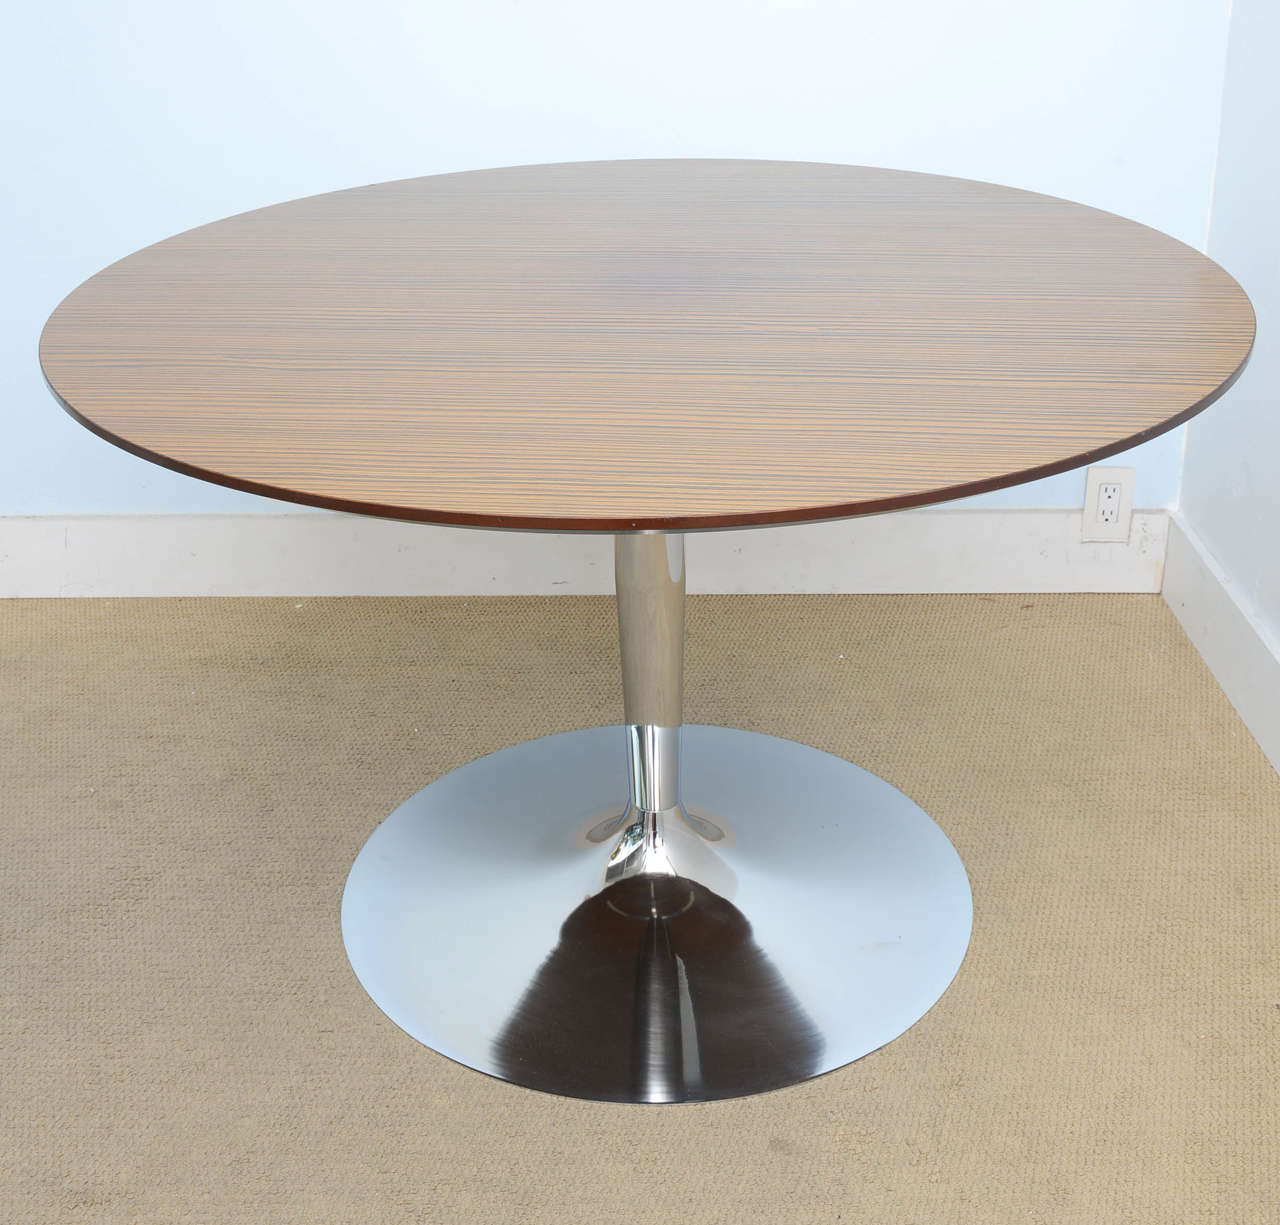 This table was manufactured in Italy. It's in excellent condition. Chrome is in excellent condition and the beautiful veneer top is also in great condition.